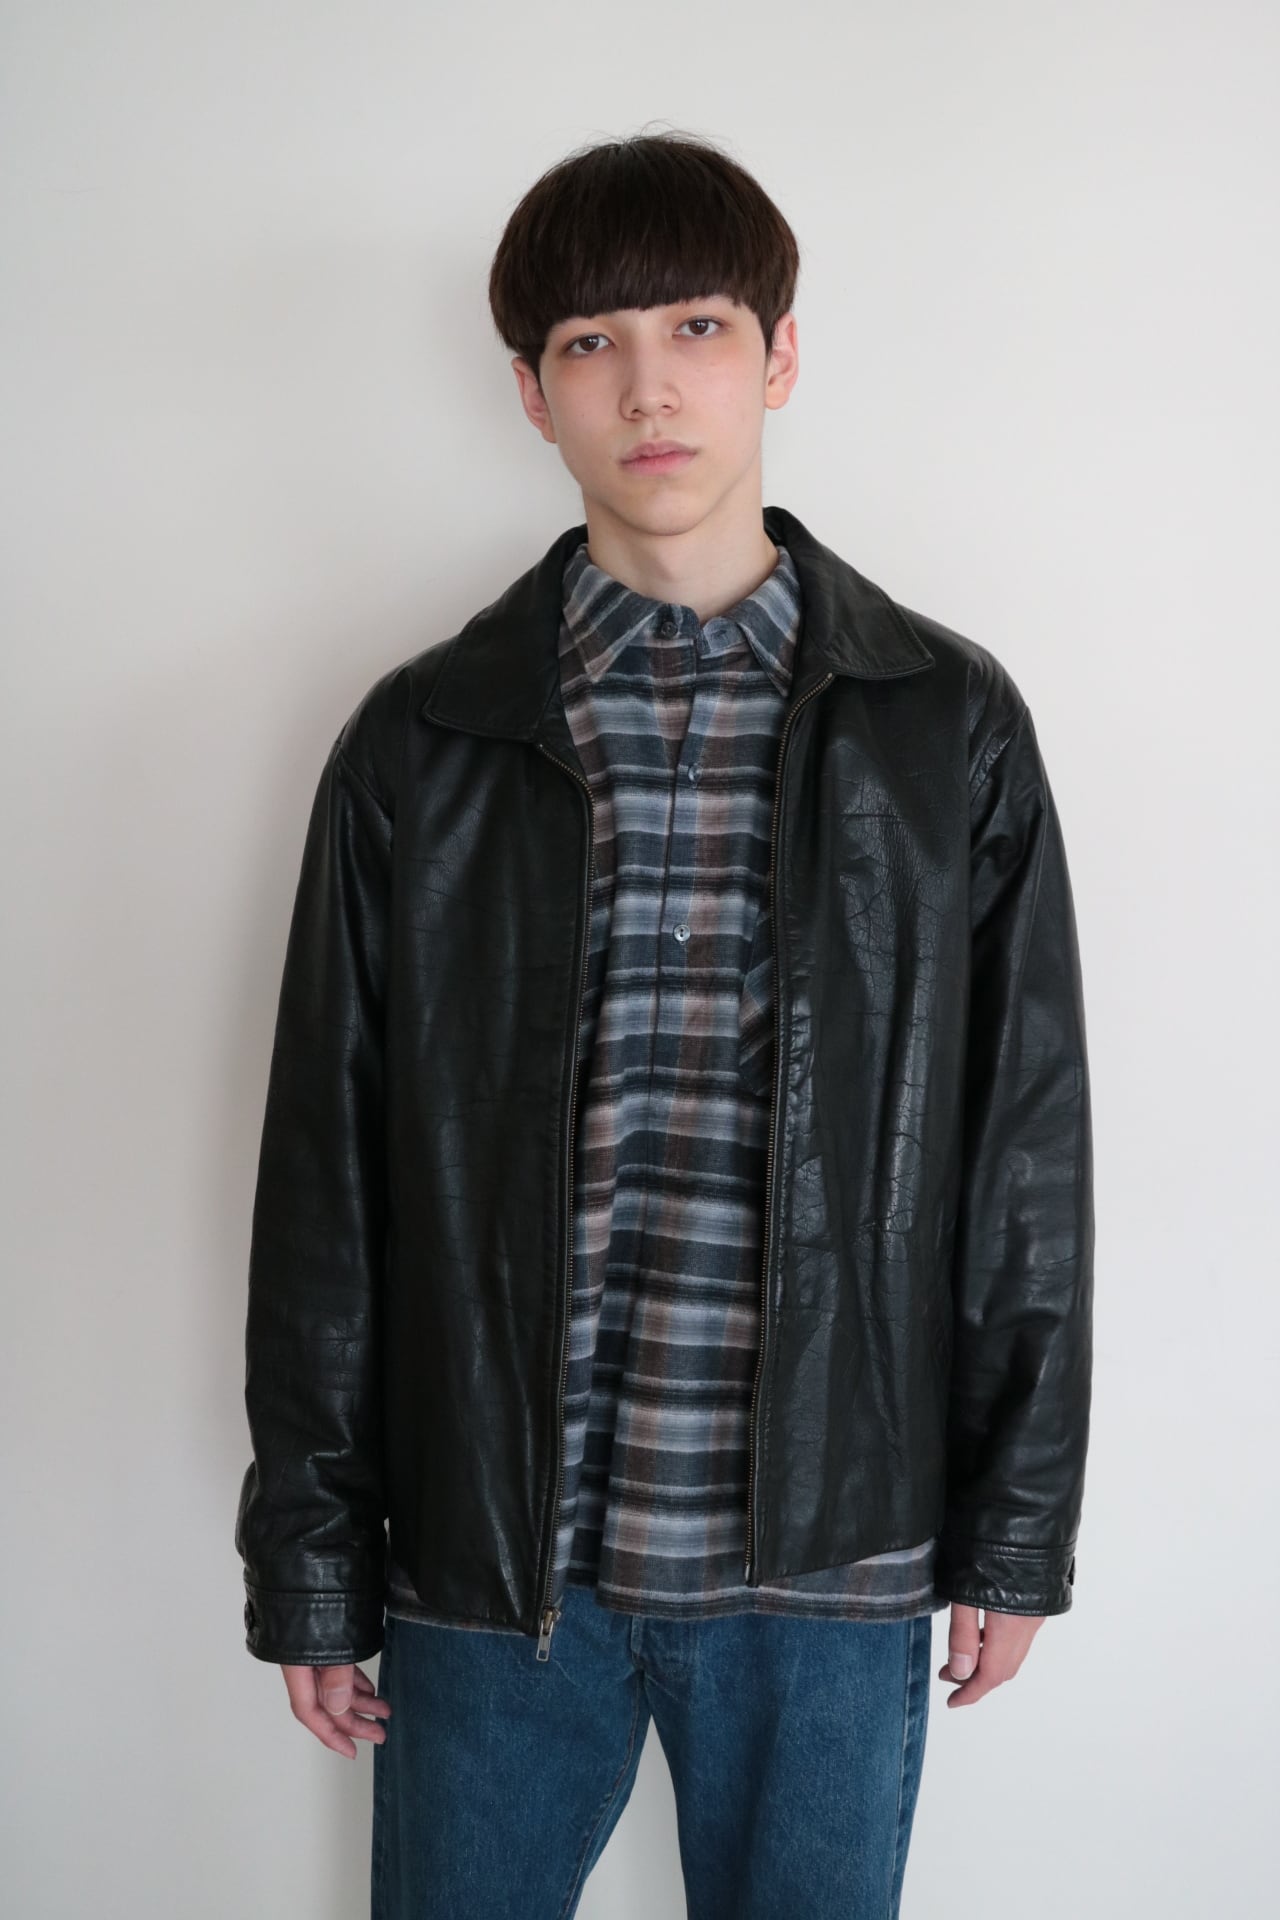 Vintage 90s GAP leather jacket | Cary powered by BASE